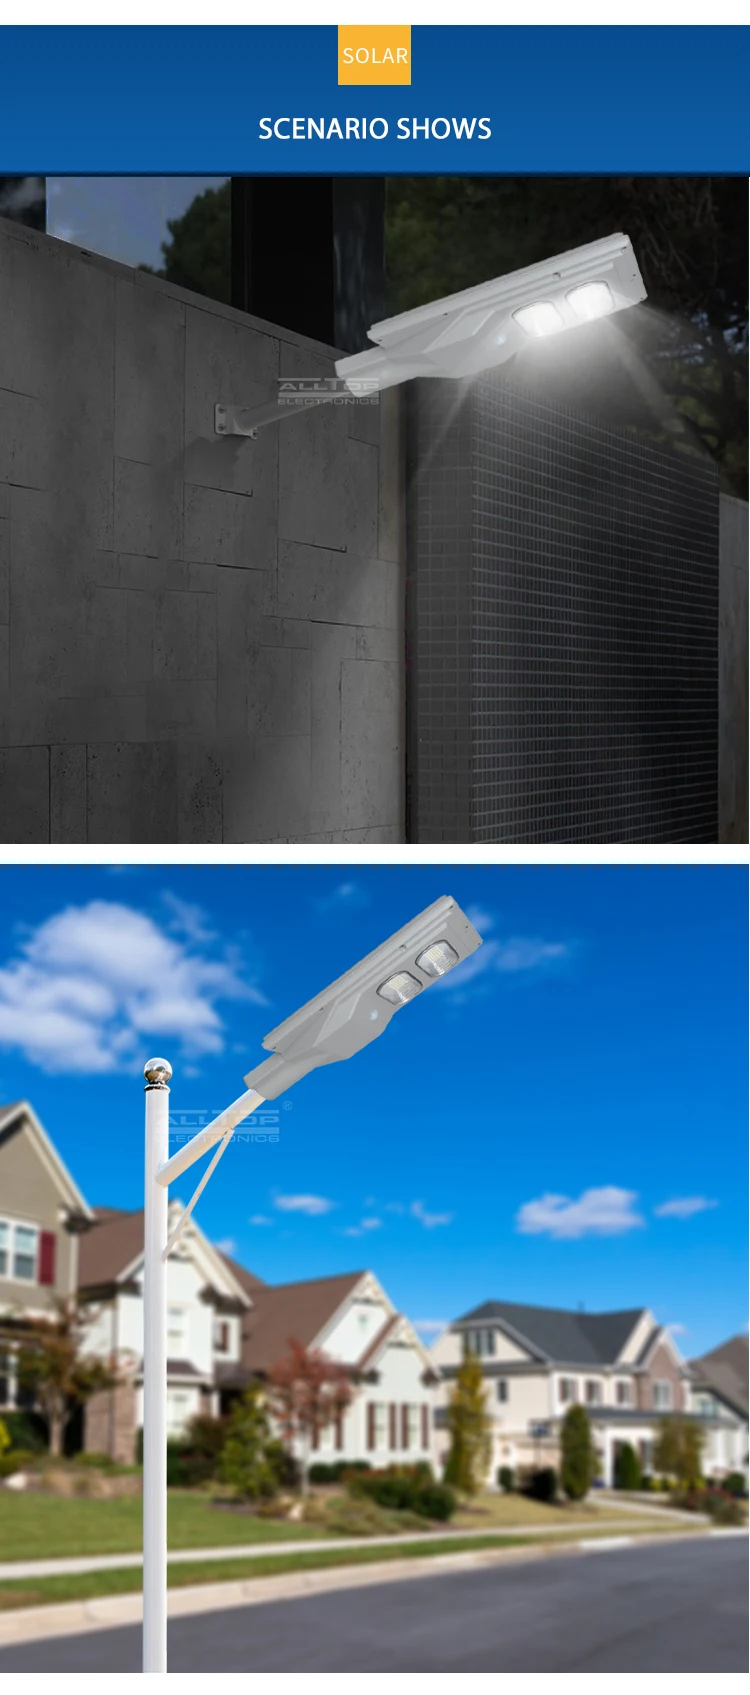 ALLTOP New Product IP65 outdoor waterproof ABS 30w 60w 90w 120w 150w solar panel integrated all in one led street light